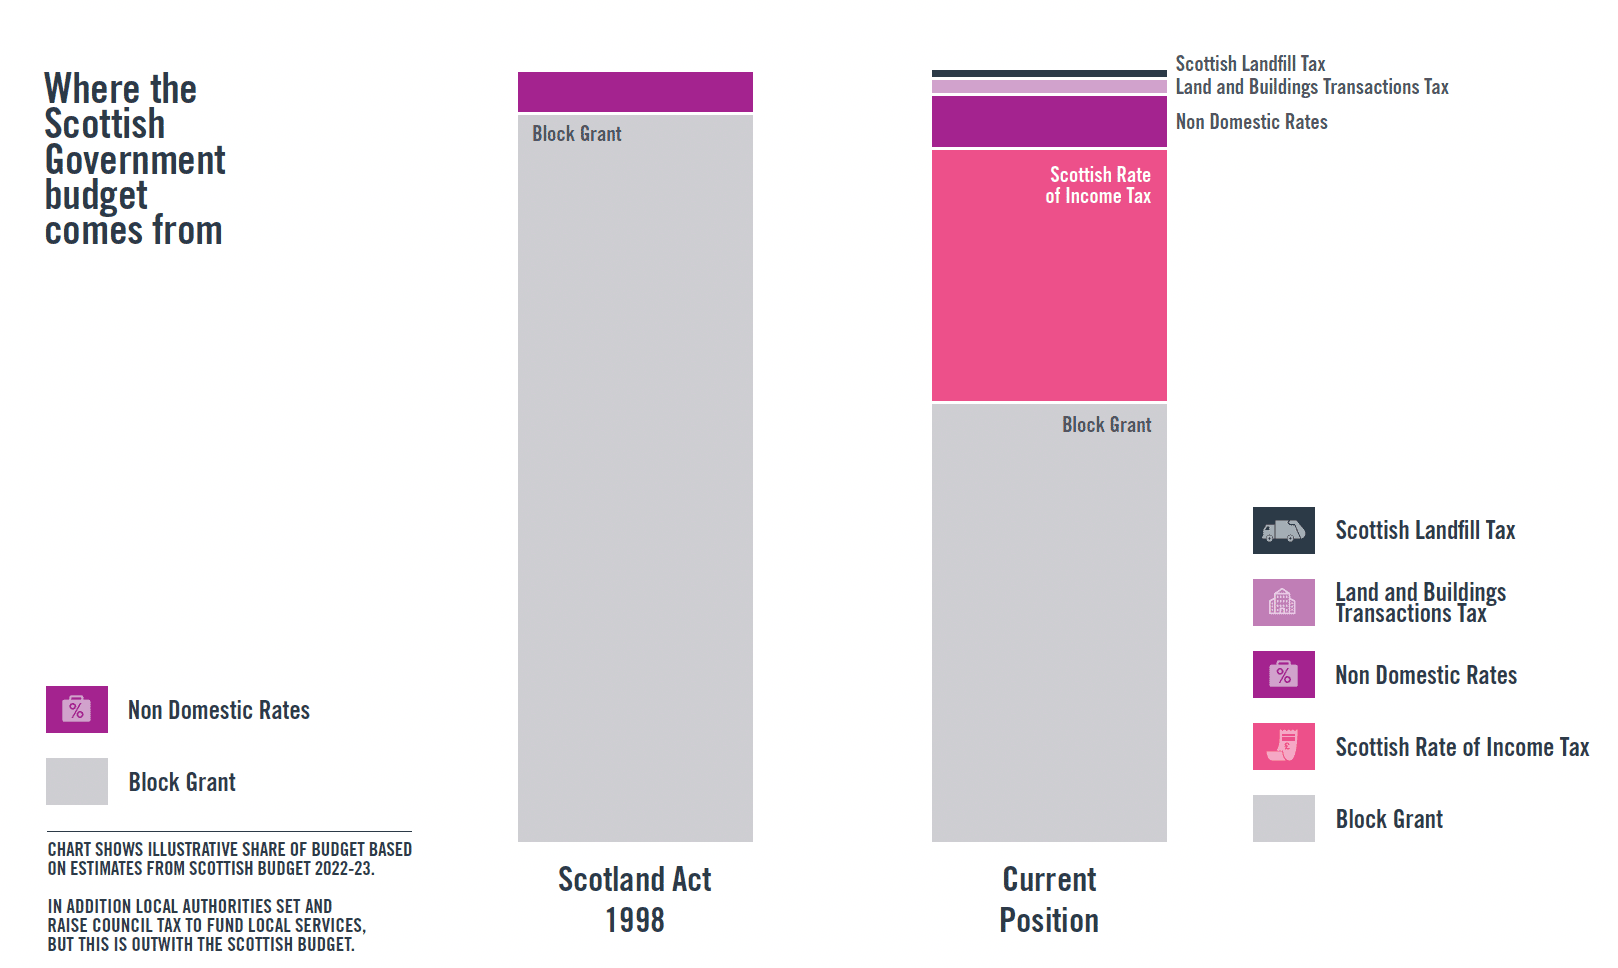 This figures illustrates how the sources of funding for the Scottish Budget has changed over time through the devolution of tax powers. This is done through a bar chart. Bar one shows the position at the Scotland Act in 1998 where the Scottish Budget was made up almost entirely from the Block Grant from the UK Government, with a very small proportion generated from non-domestic rates (Business Rates). Bar two sets out the current position in 2021-22, showing that up to 40% of the Scottish Budget is now generated from devolved taxes, the largest of which is derived from Scottish Income Tax, followed by much smaller contributions from non-domestic rates, Land and Buildings Transaction Tax and Scottish Landfill Tax. The Block Grant continues to provide the majority of funding for the Scottish Budget.